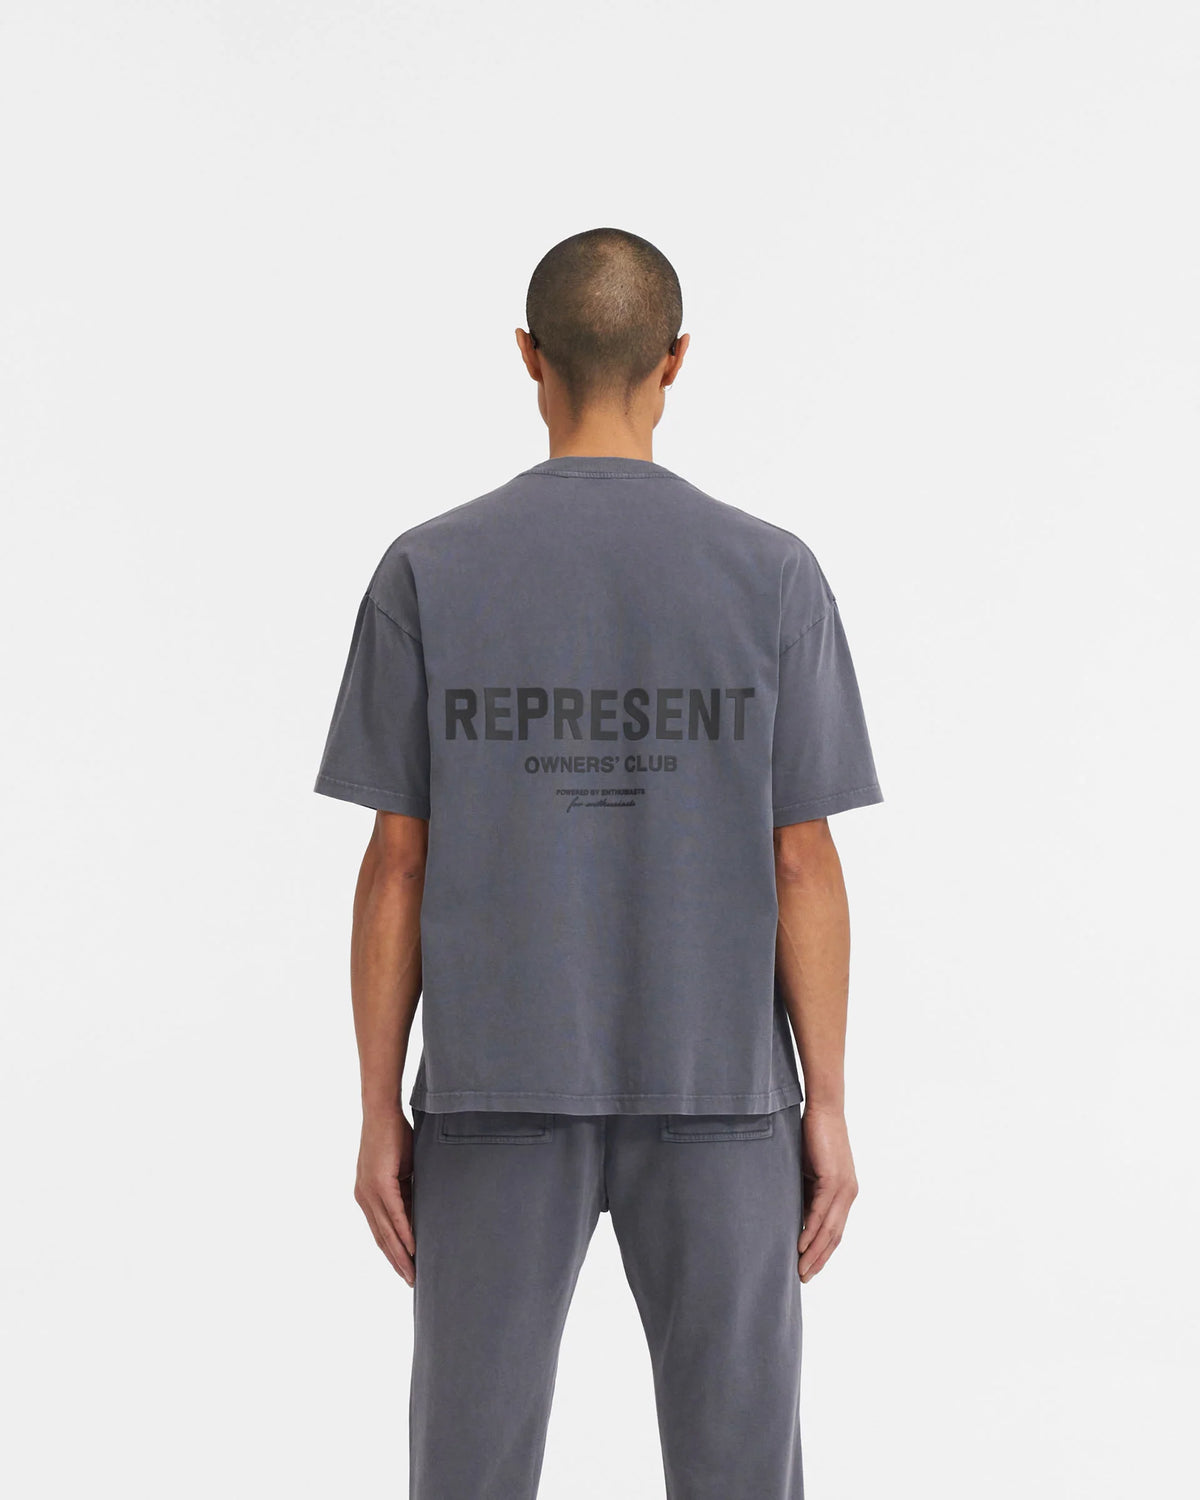 Represent Owners Club Tee - Grey